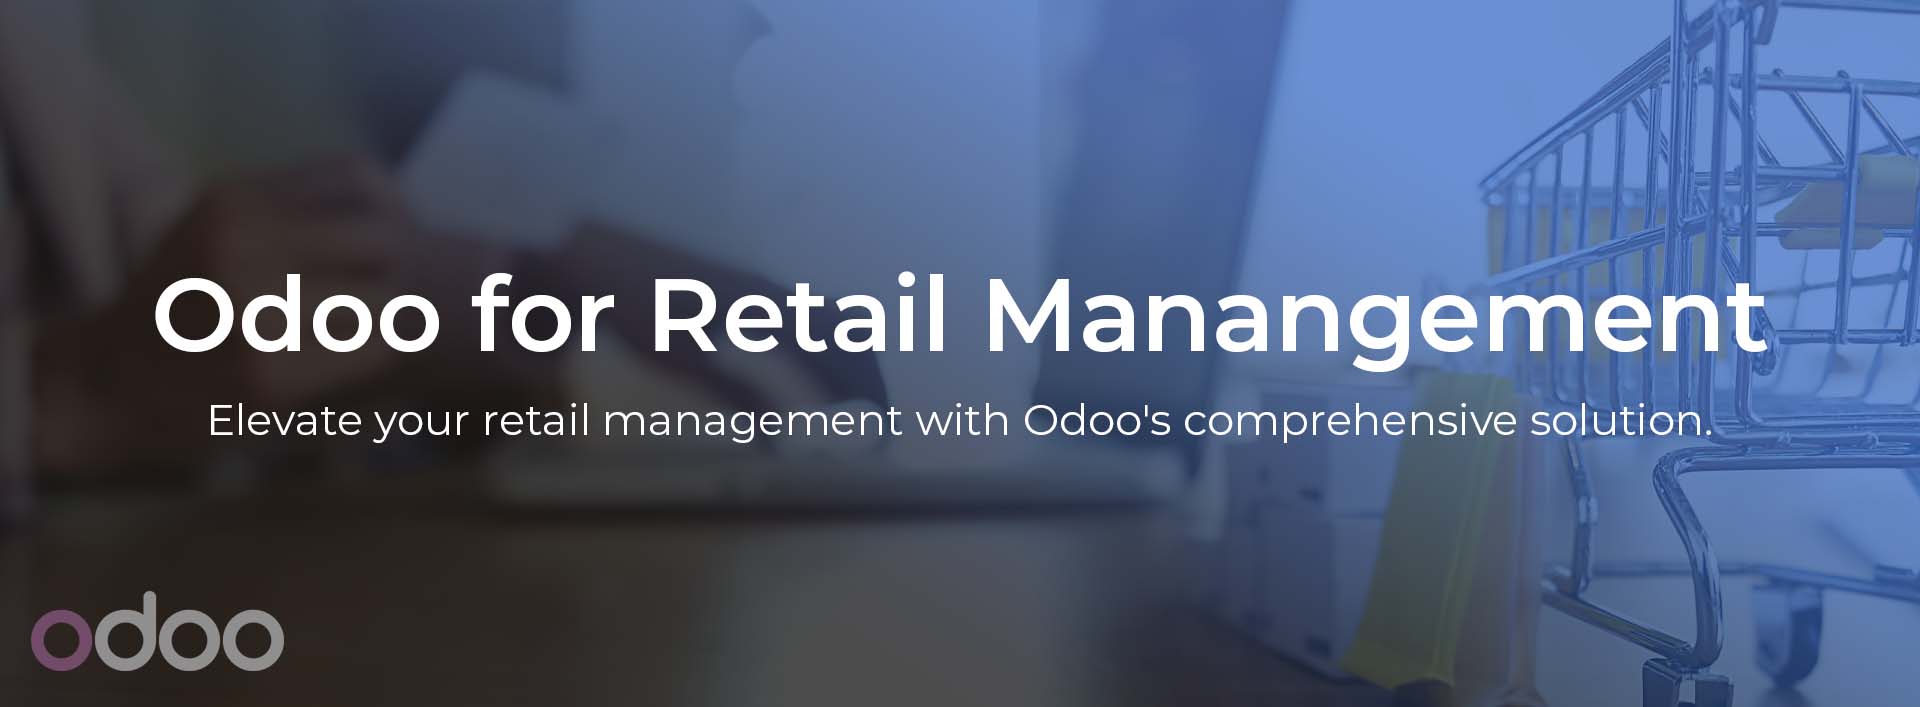 odoo for retail management